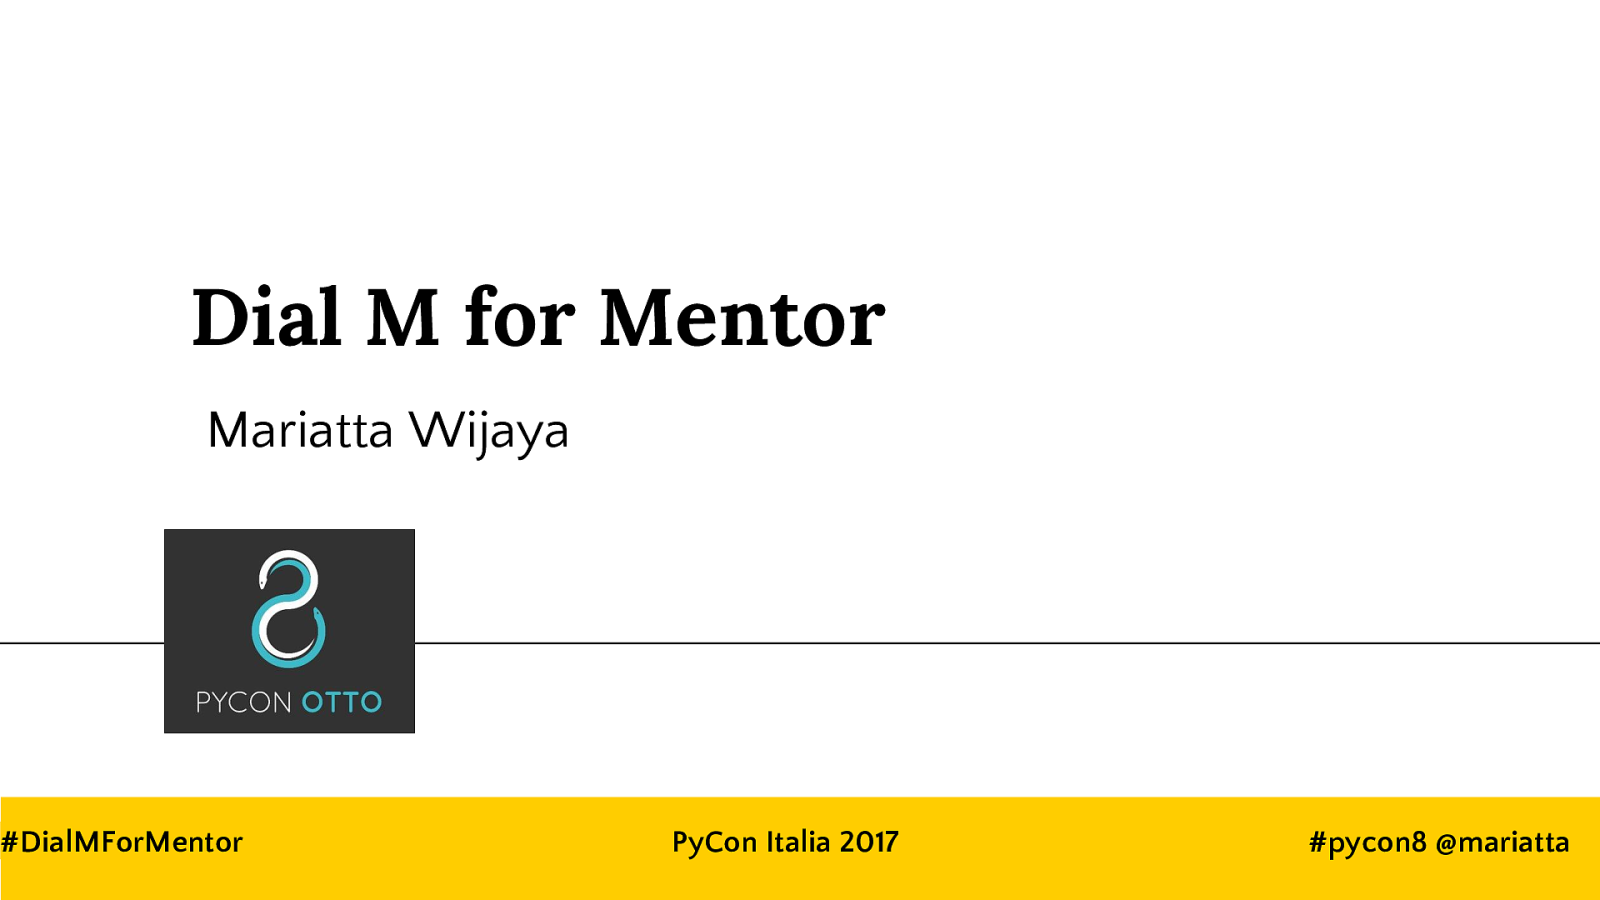 Dial M For Mentor